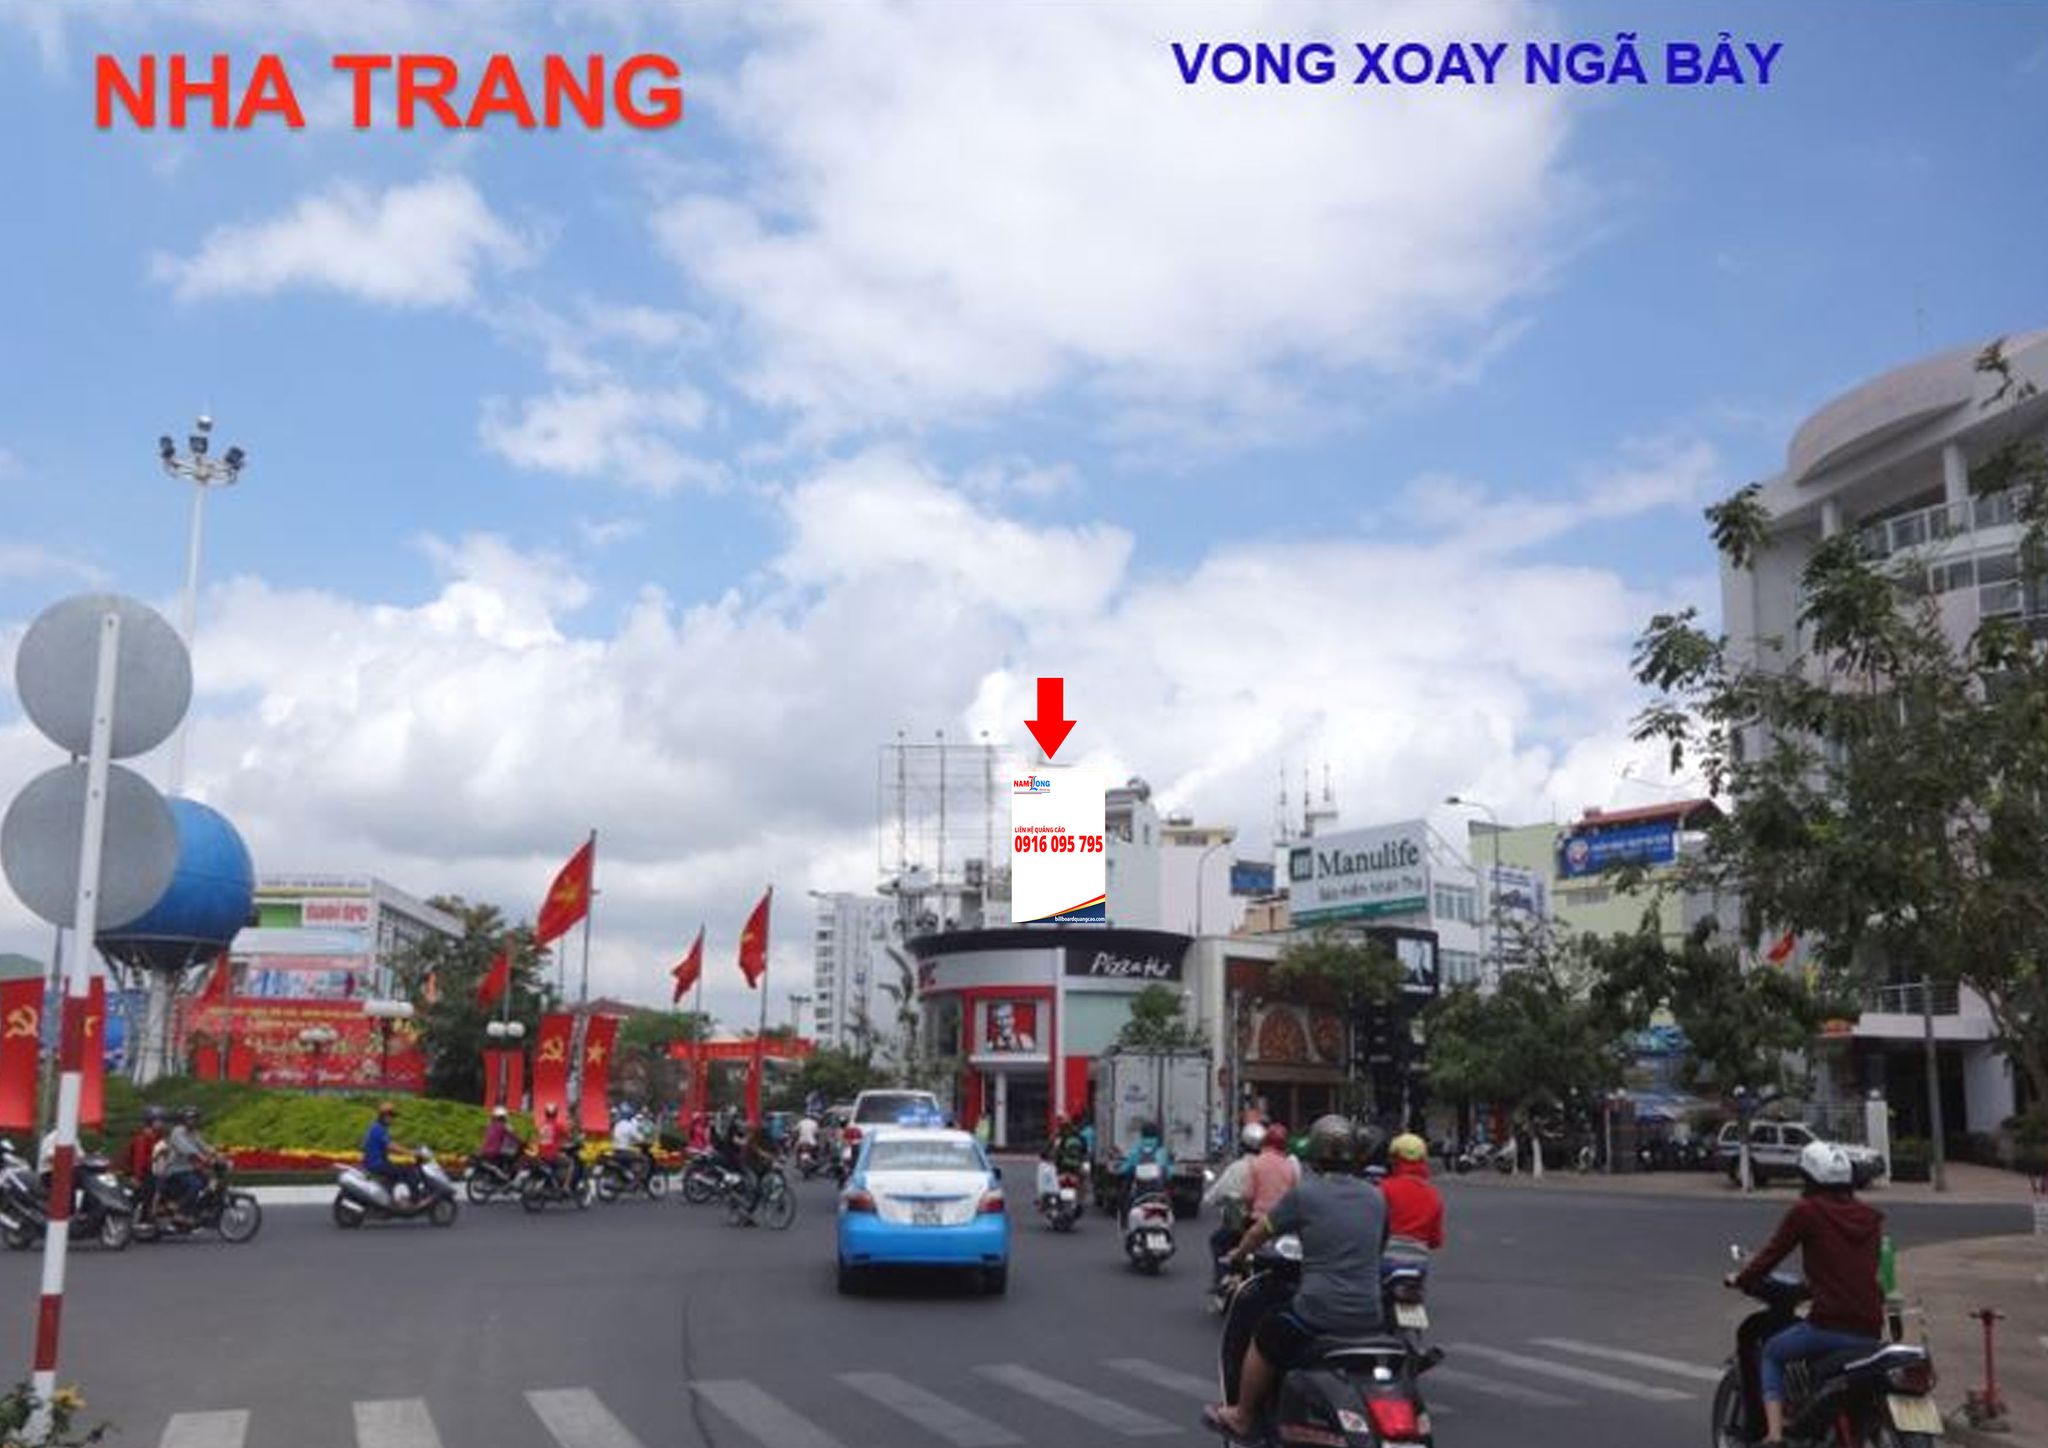 VONG XOAY NGÃ BẢY-KH-006